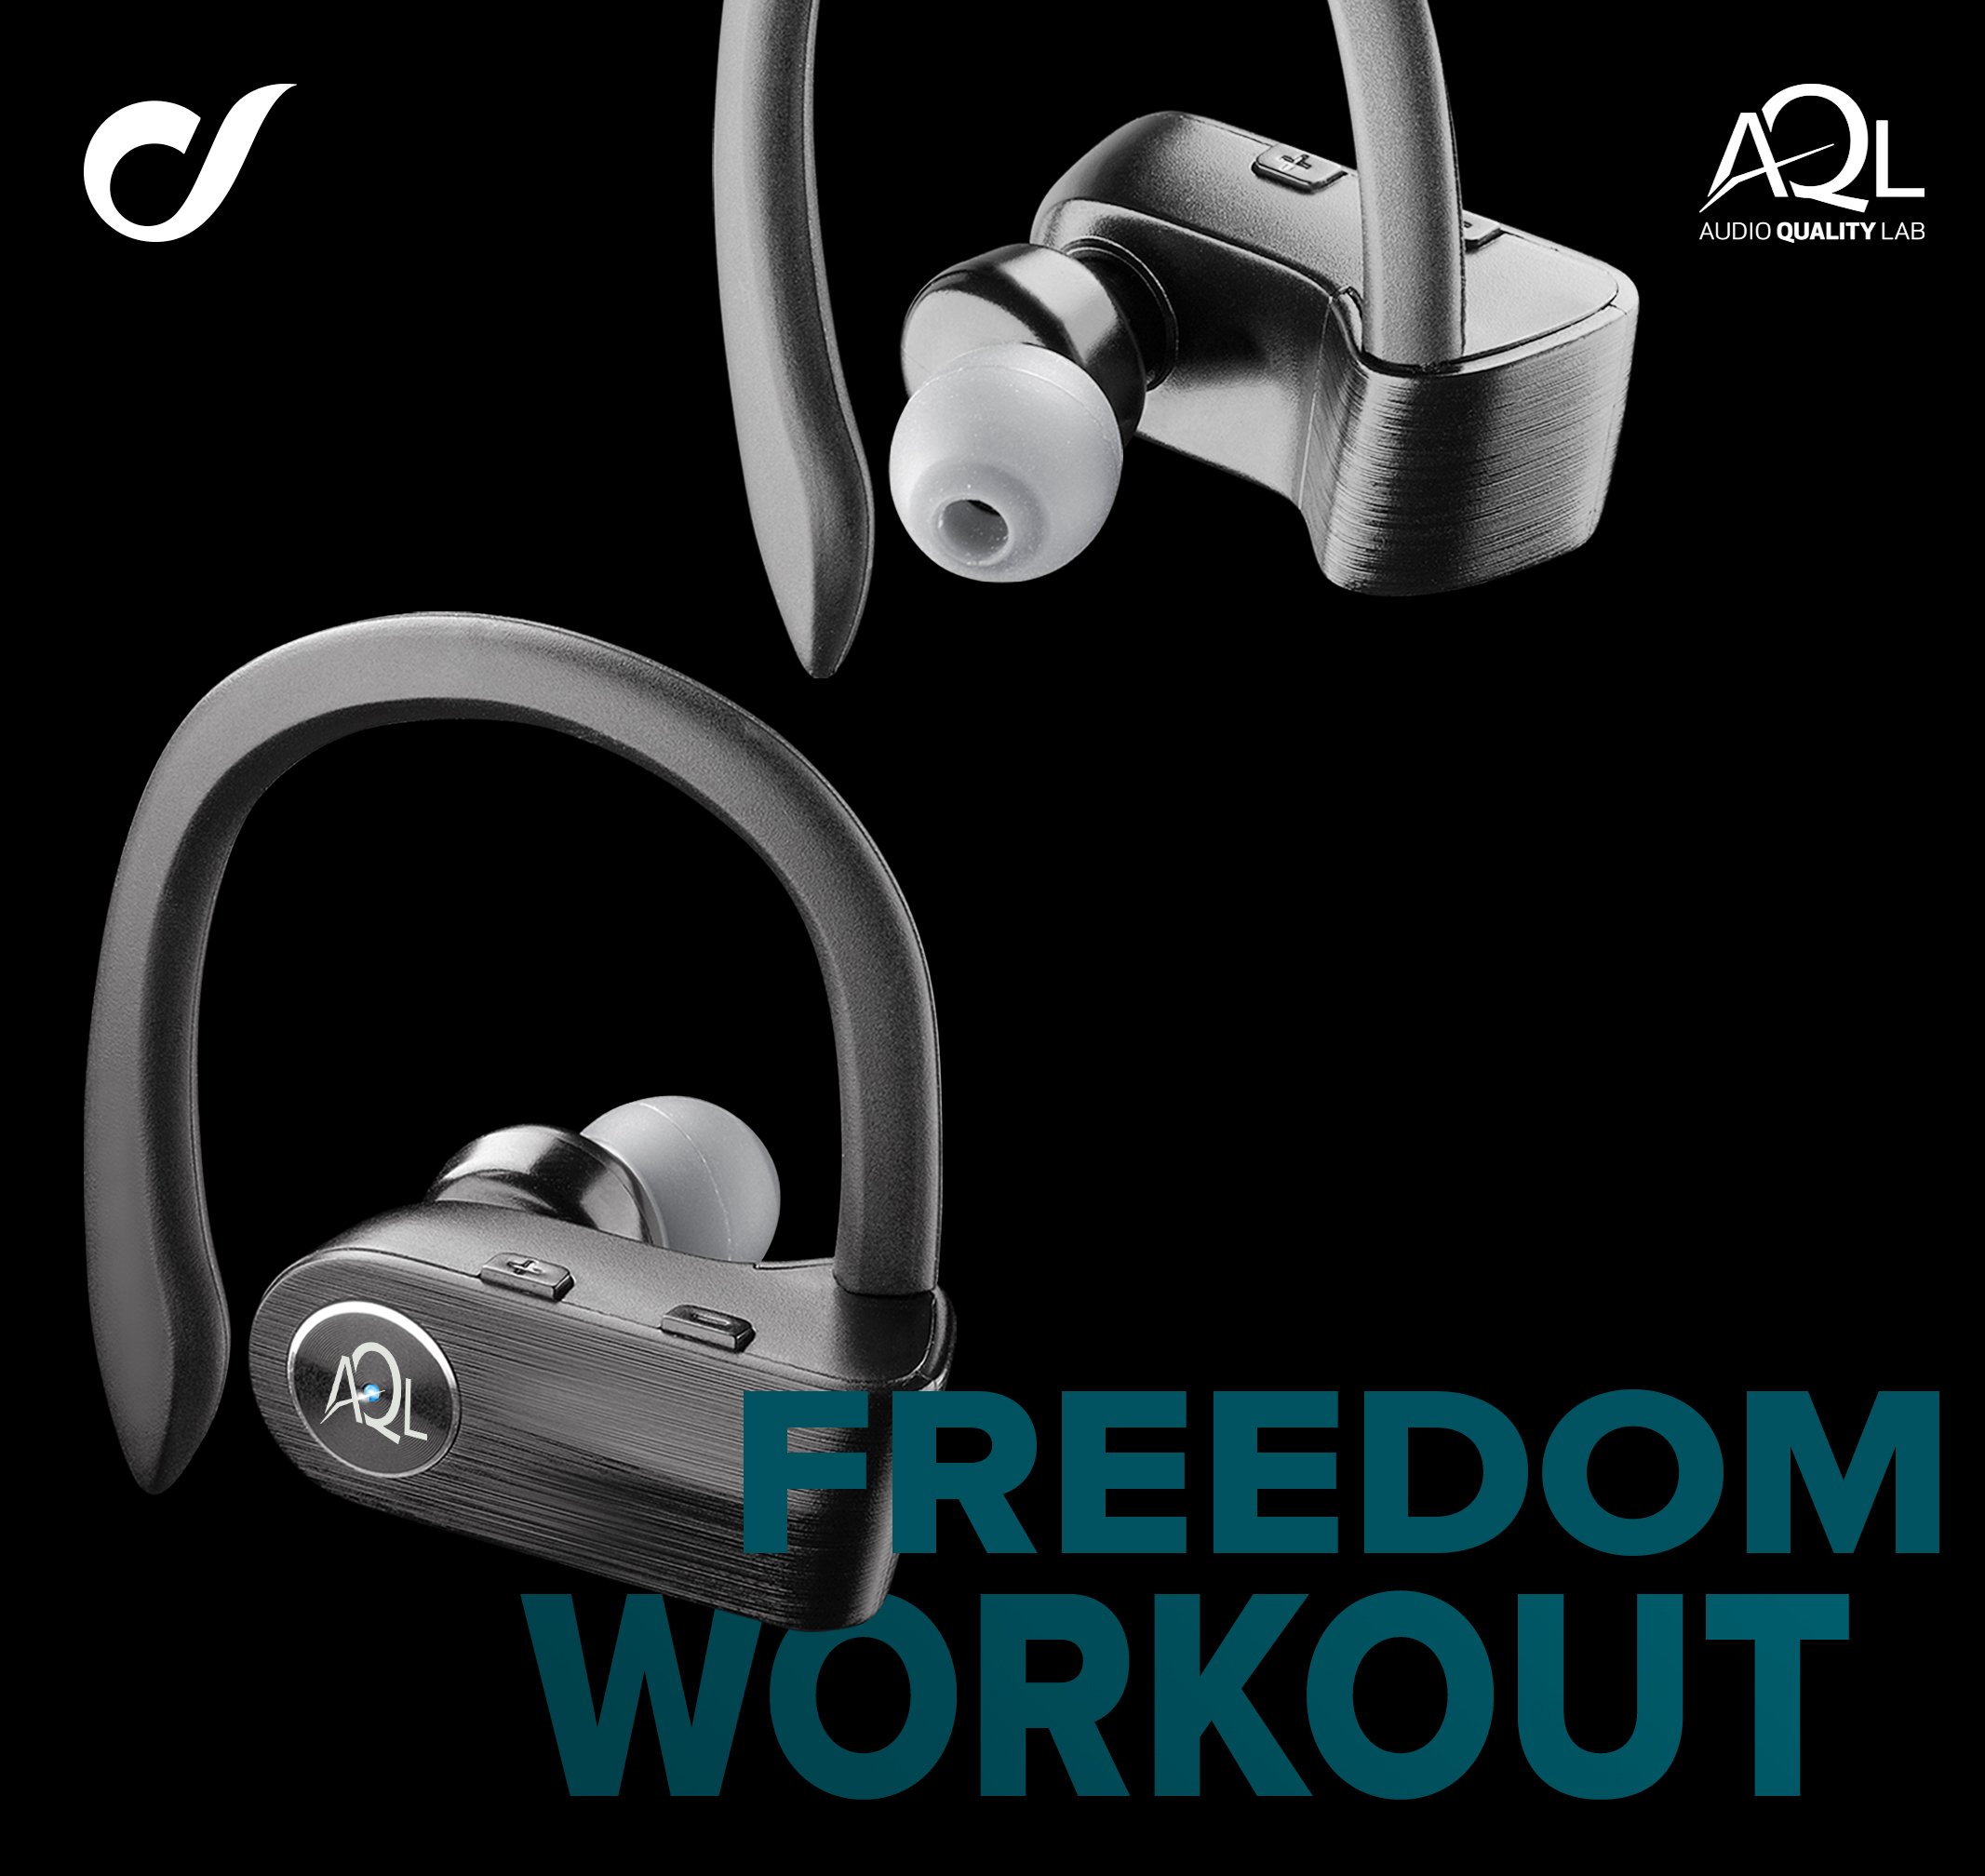 Cellularline on Twitter: "The greatest freedom for your movements, the best  soundtrack for your workouts: discover Sport Boost, the AQL Bluetooth  headsets with True Wireless Stereo technology, ultra-lightweight and stable  #Cellularline #AQL